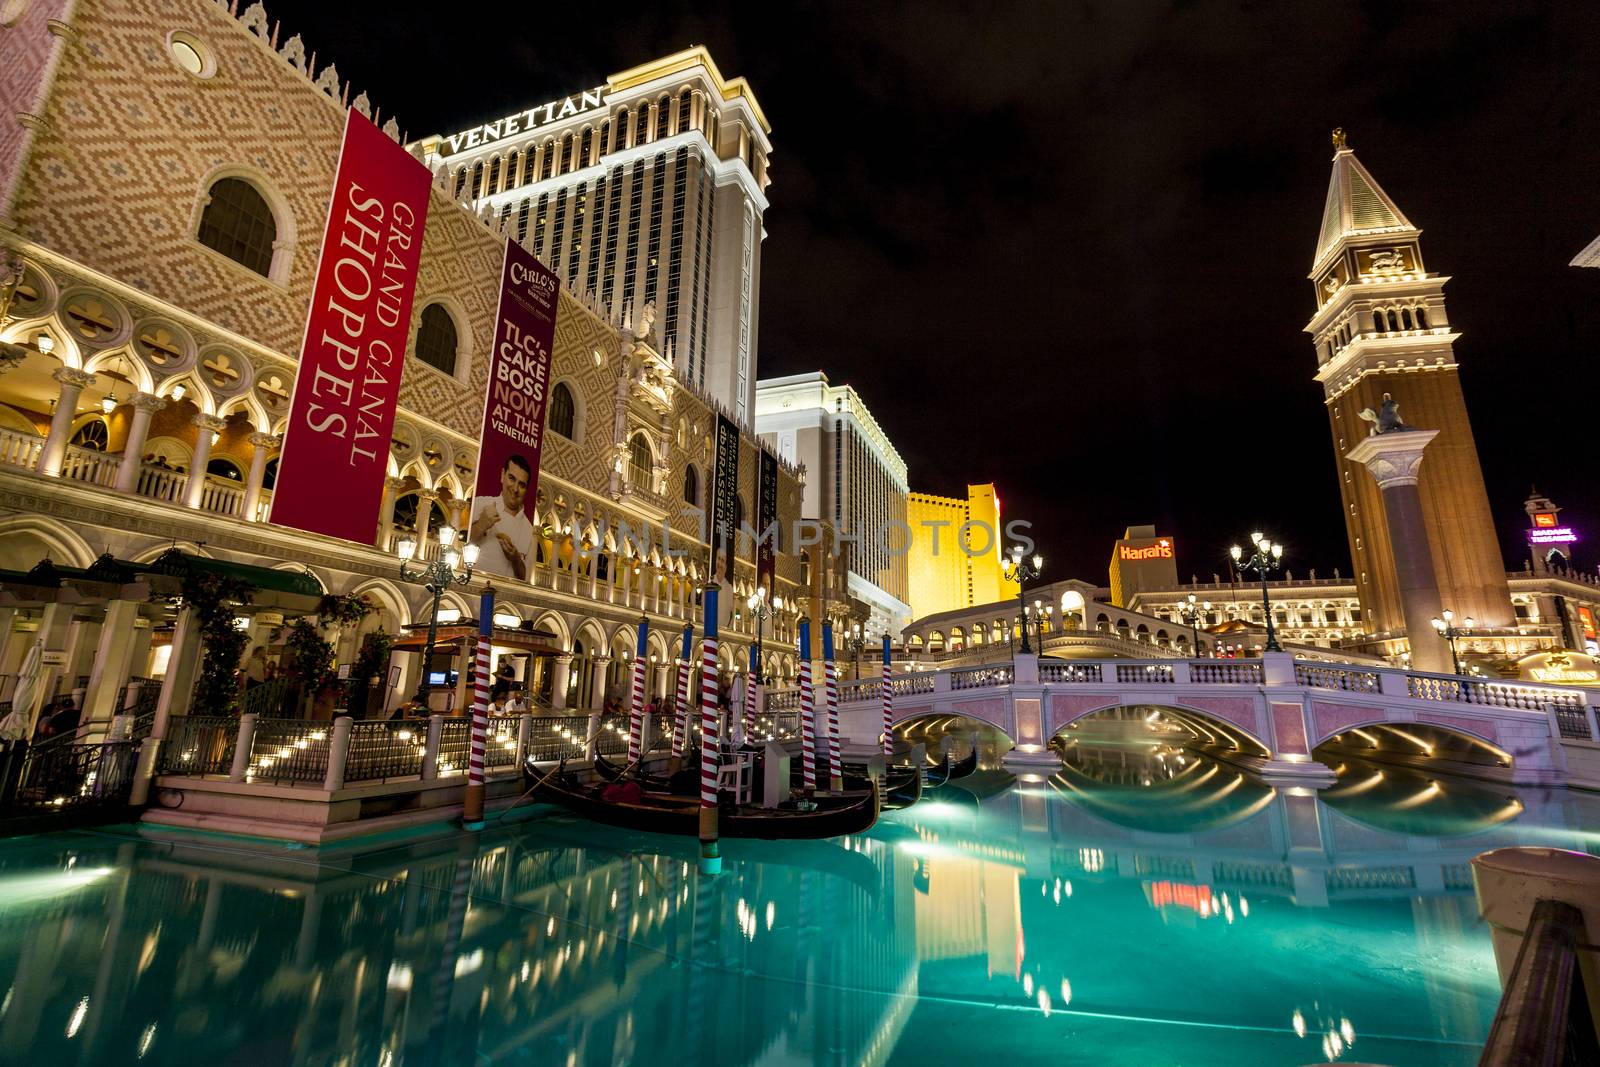 LAS VEGAS USA JULY 7 2015: The Venetian Resort Hotel & Casino The resort opened on May 3, 1999 with flutter of white doves, sounding trumpets, singing gondoliers and actress Sophia Loren.